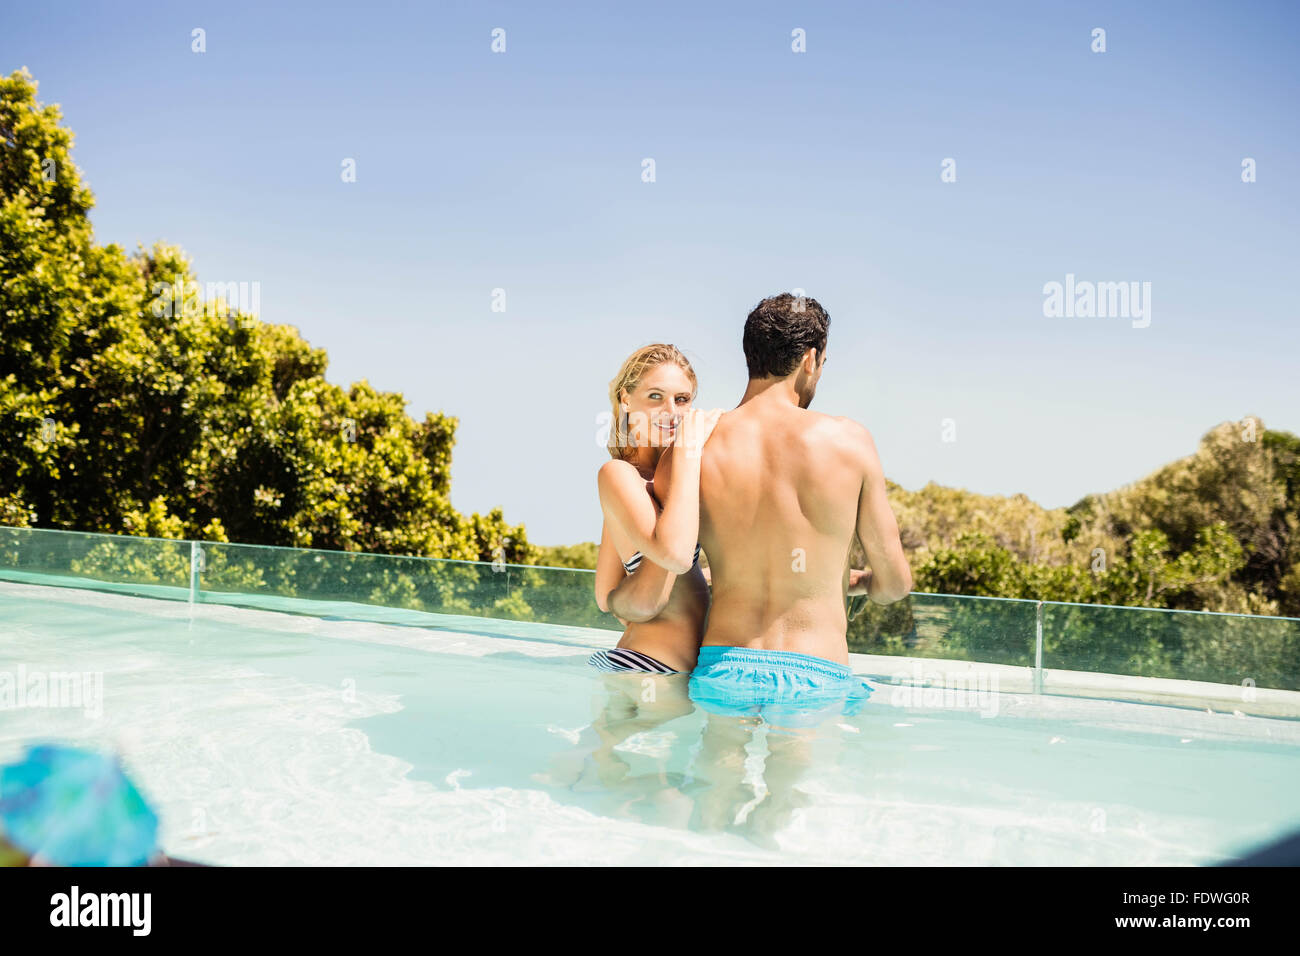 Couple kissing in swimming pool, Stock Photo, Picture And Rights Managed  Image. Pic. EXA-JA3-0160 | agefotostock